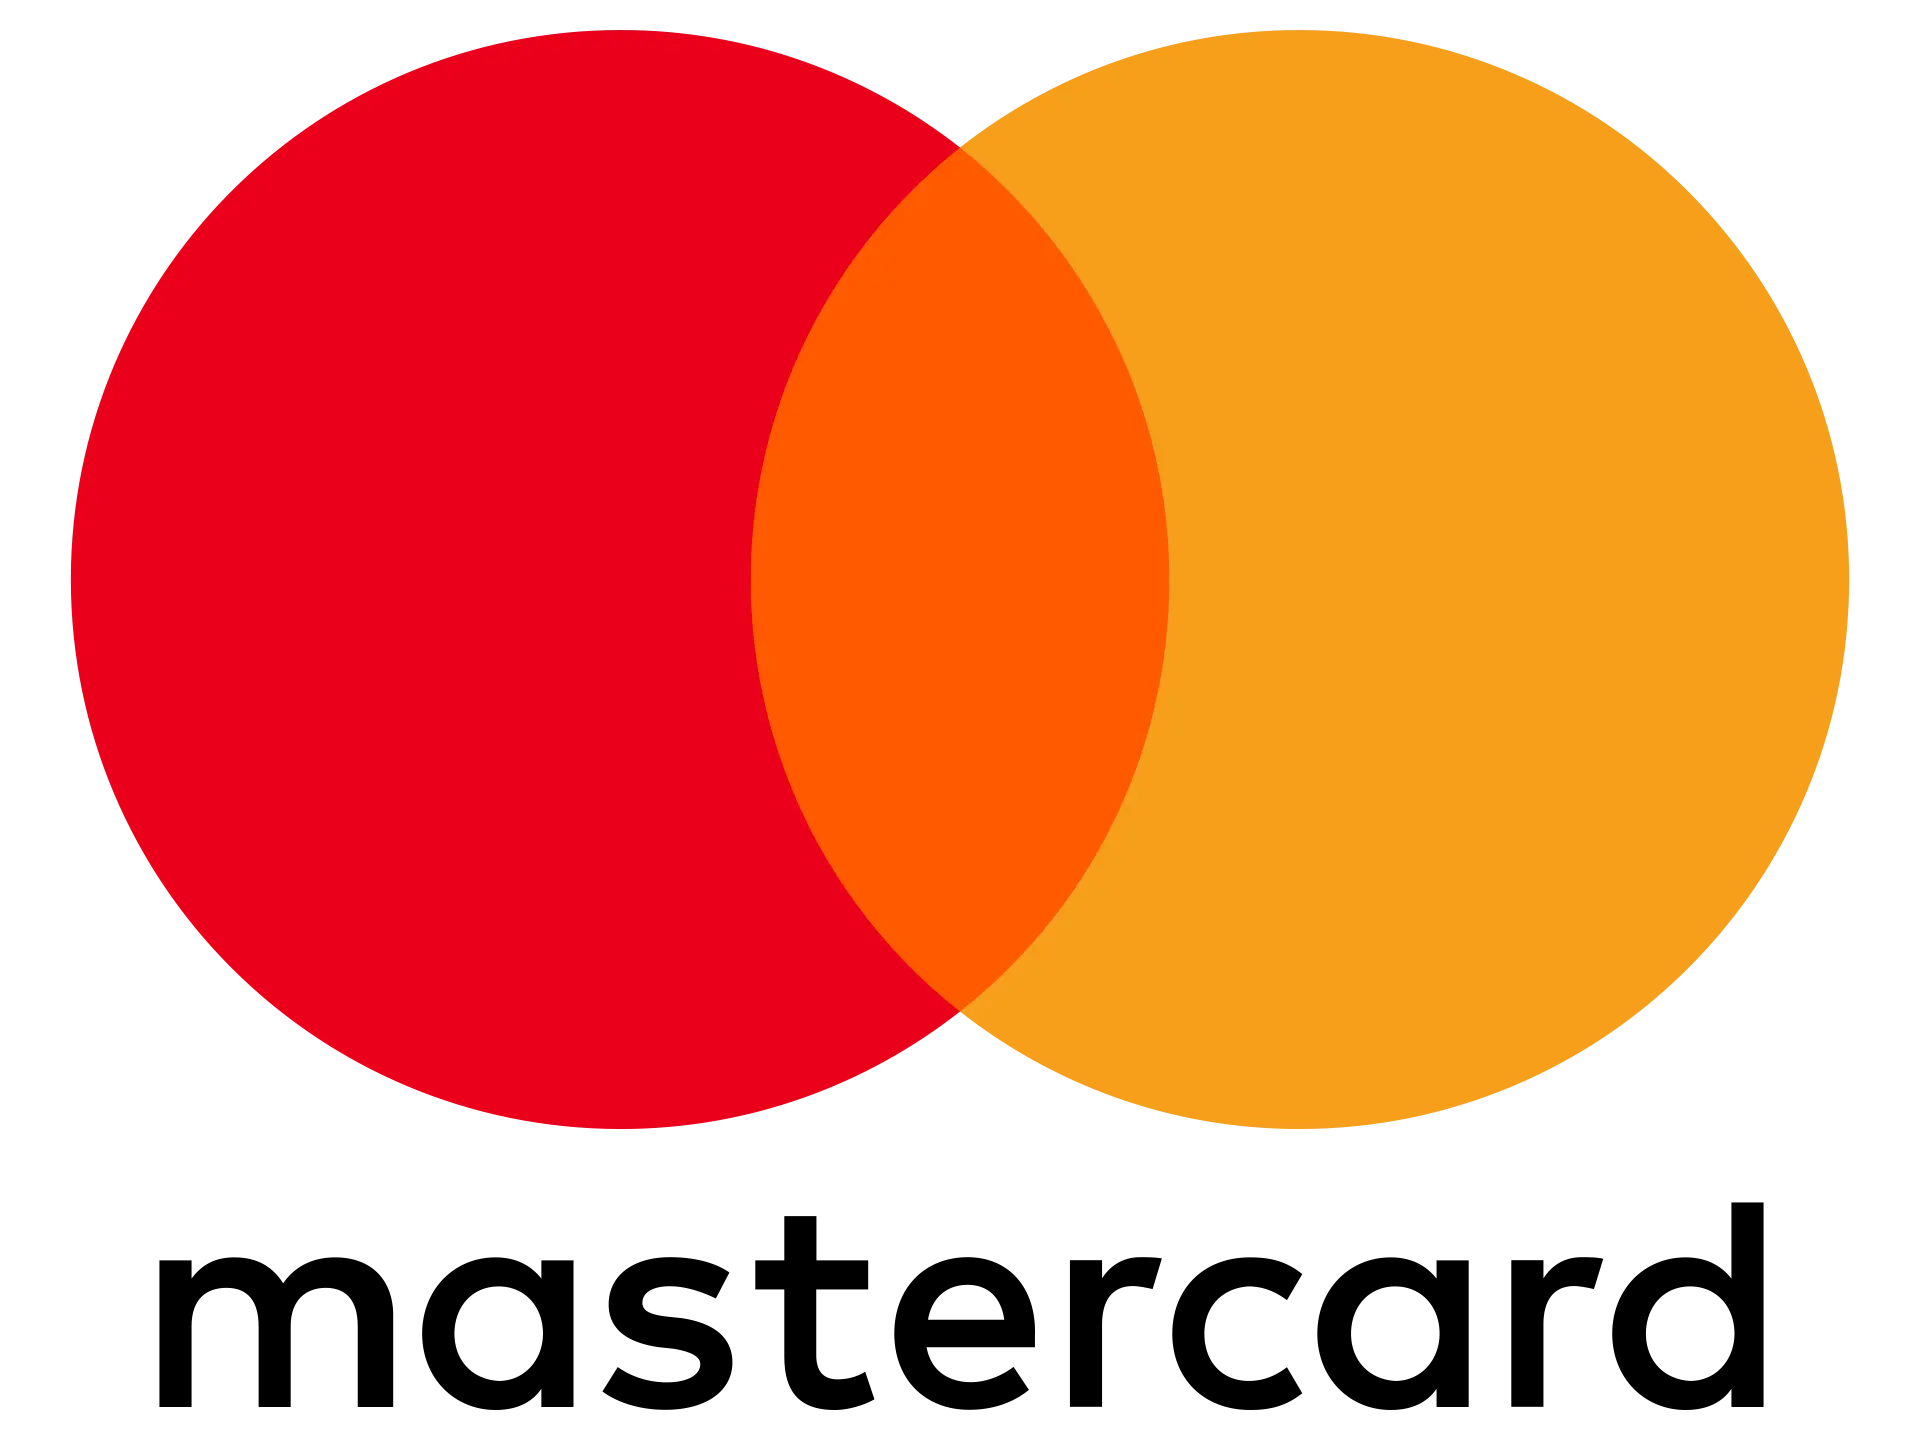 Mastercard in India on debit/credit cards offers fee-free transactions.